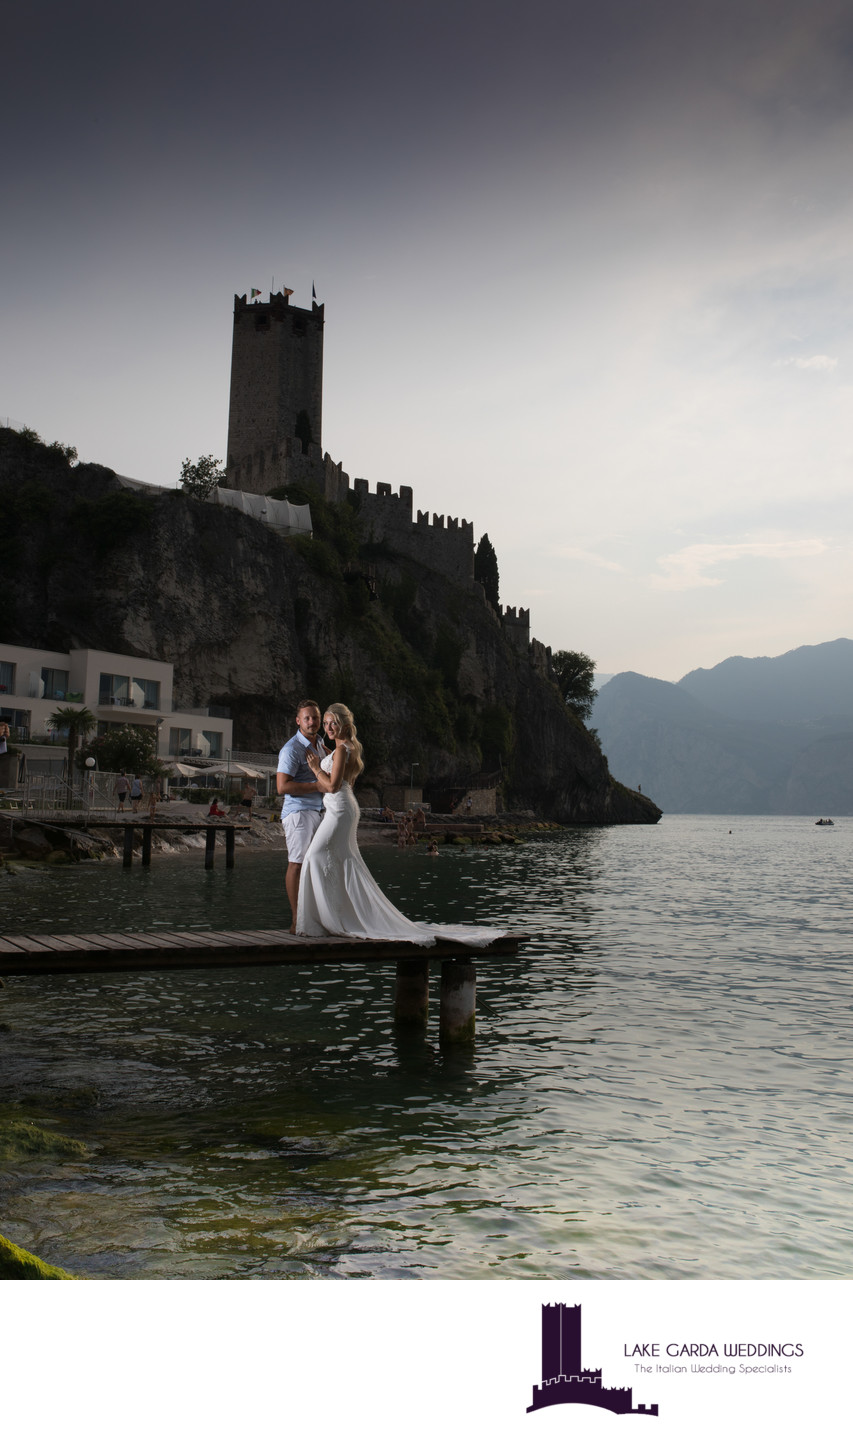 Divine and romantic castle weddings in  Europe.